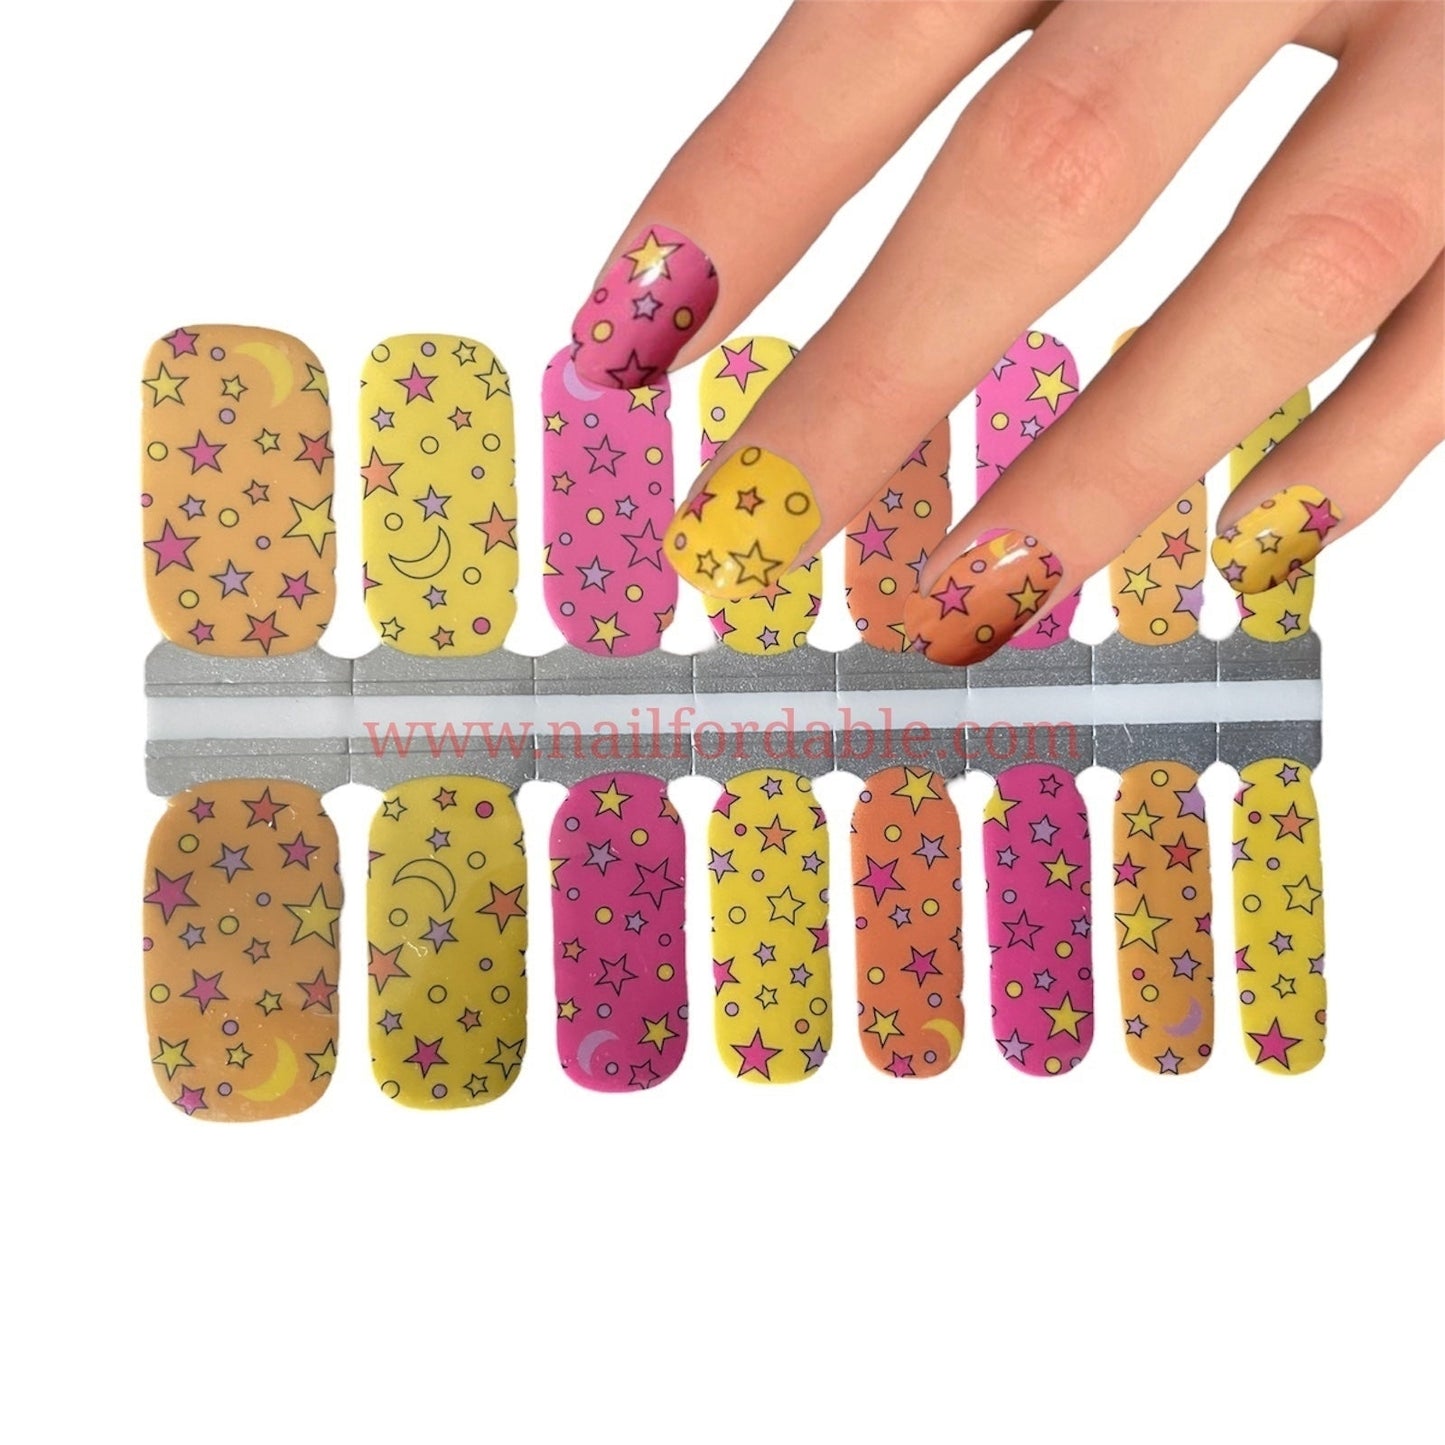 Moons and stars Nail Wraps | Semi Cured Gel Wraps | Gel Nail Wraps |Nail Polish | Nail Stickers